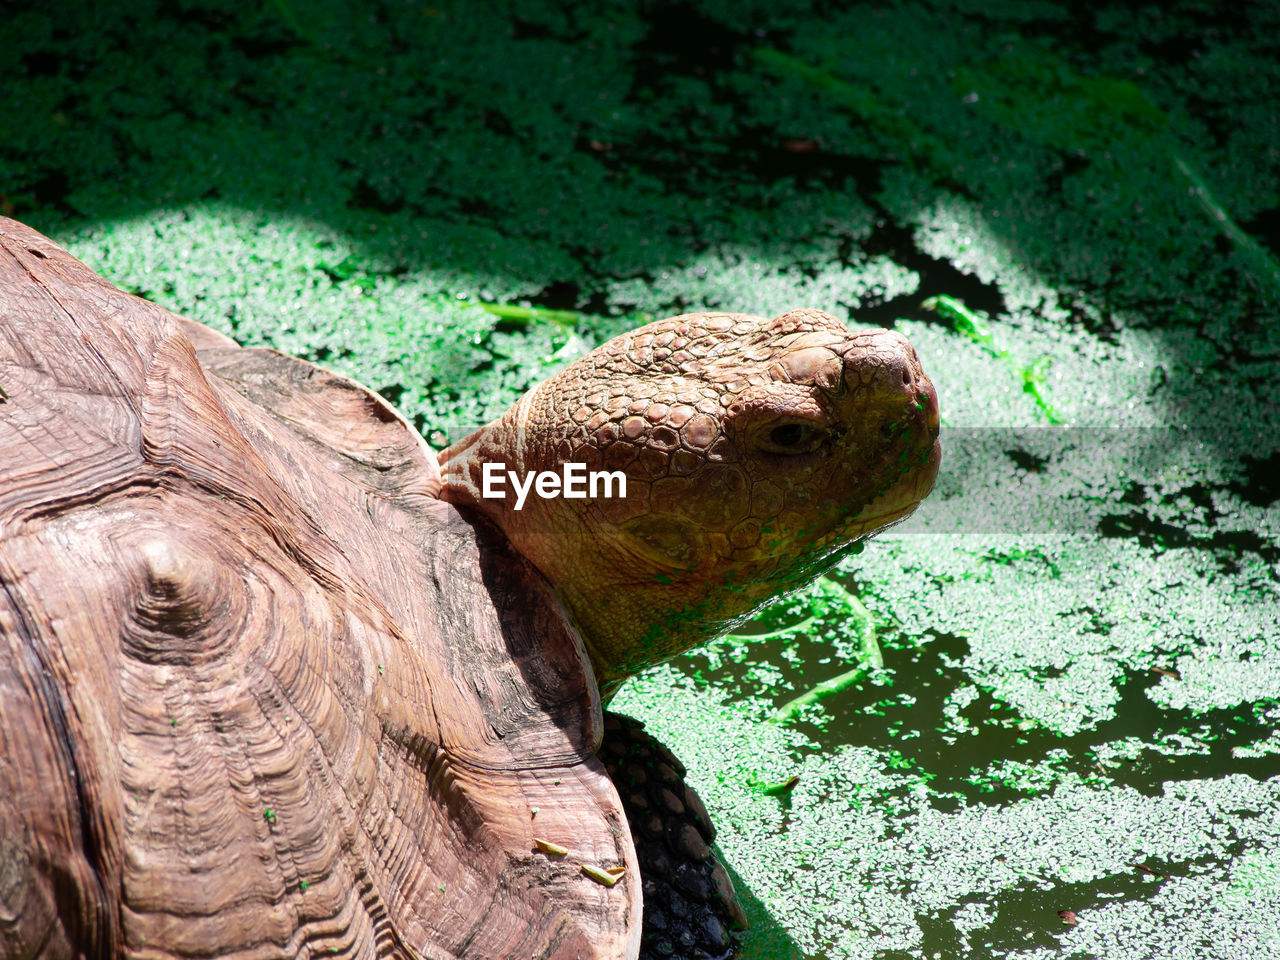 HIGH ANGLE VIEW OF A TURTLE IN THE WATER